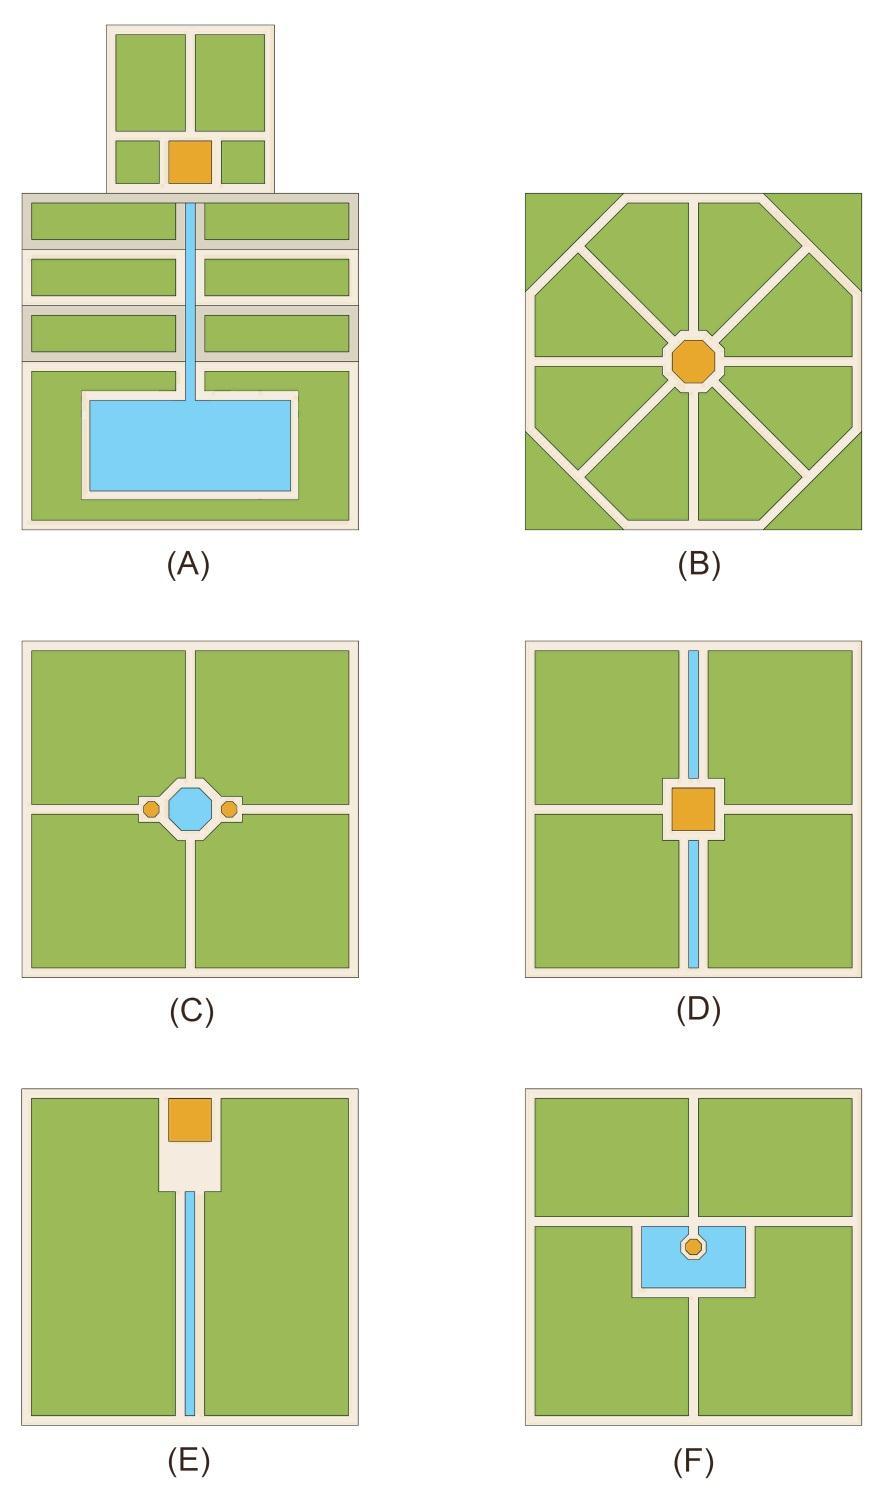 Picture ( ) Some Patterns for Persian Garden (A) Stepped one, (B)Octagonal garden, (C)